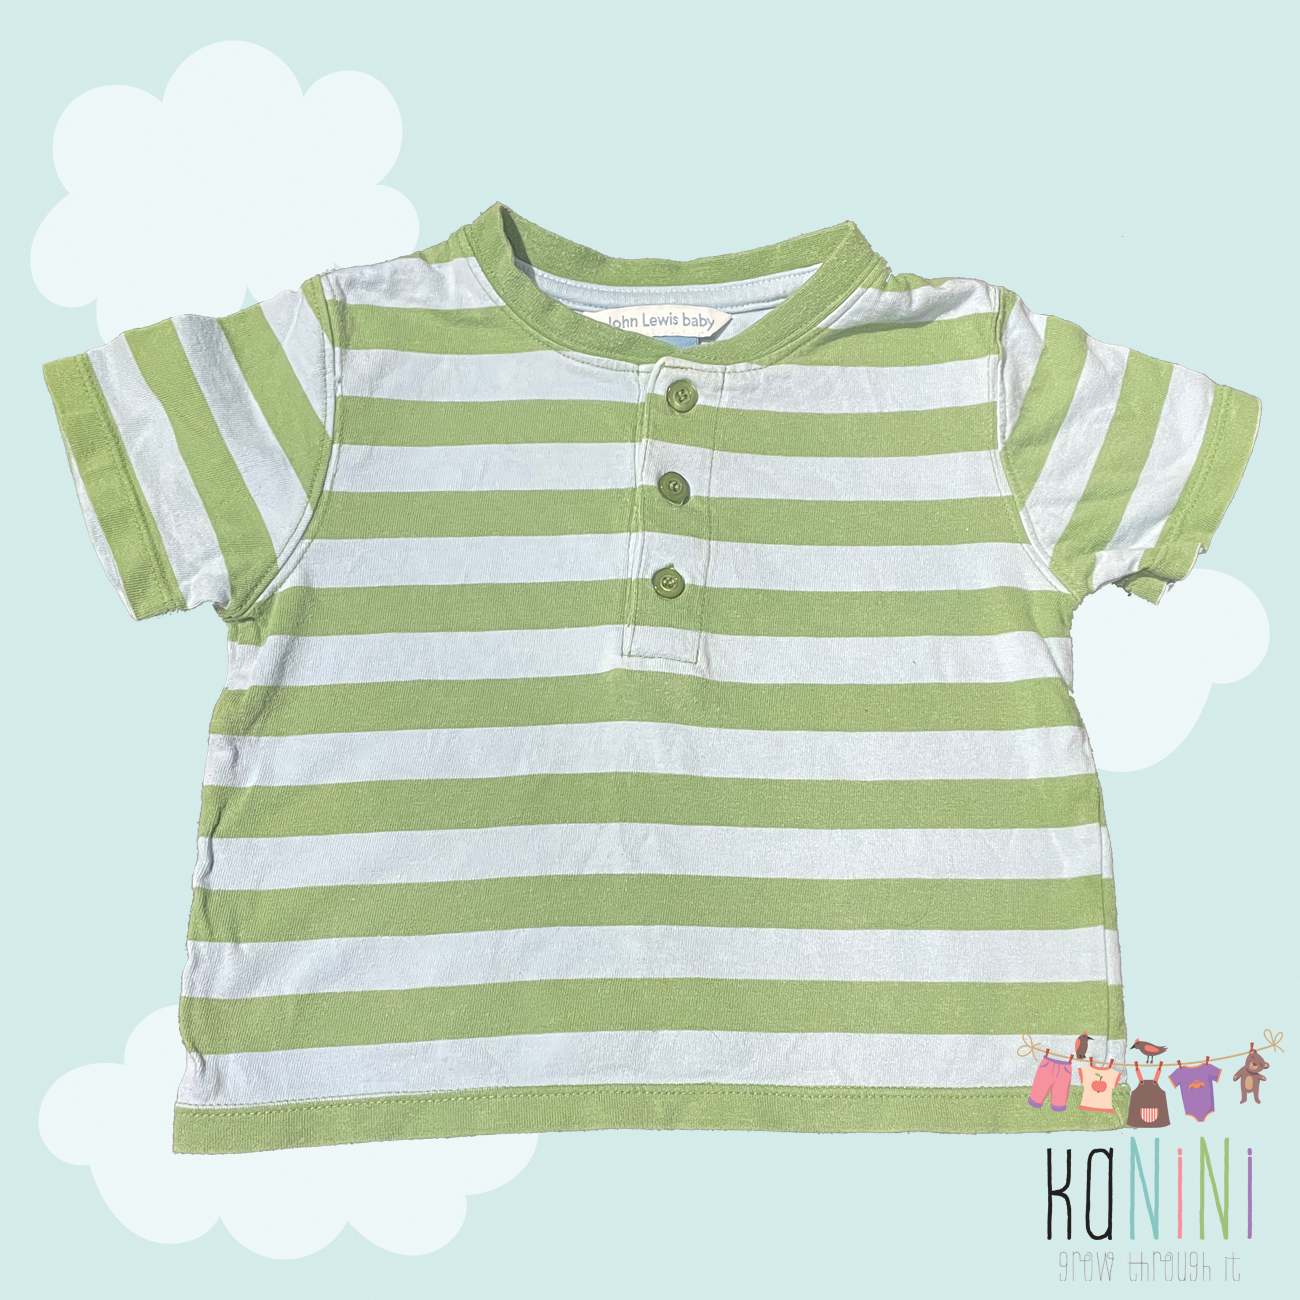 Featured image for “John Lewis Baby 12 - 18 Months Boys T-Shirt”